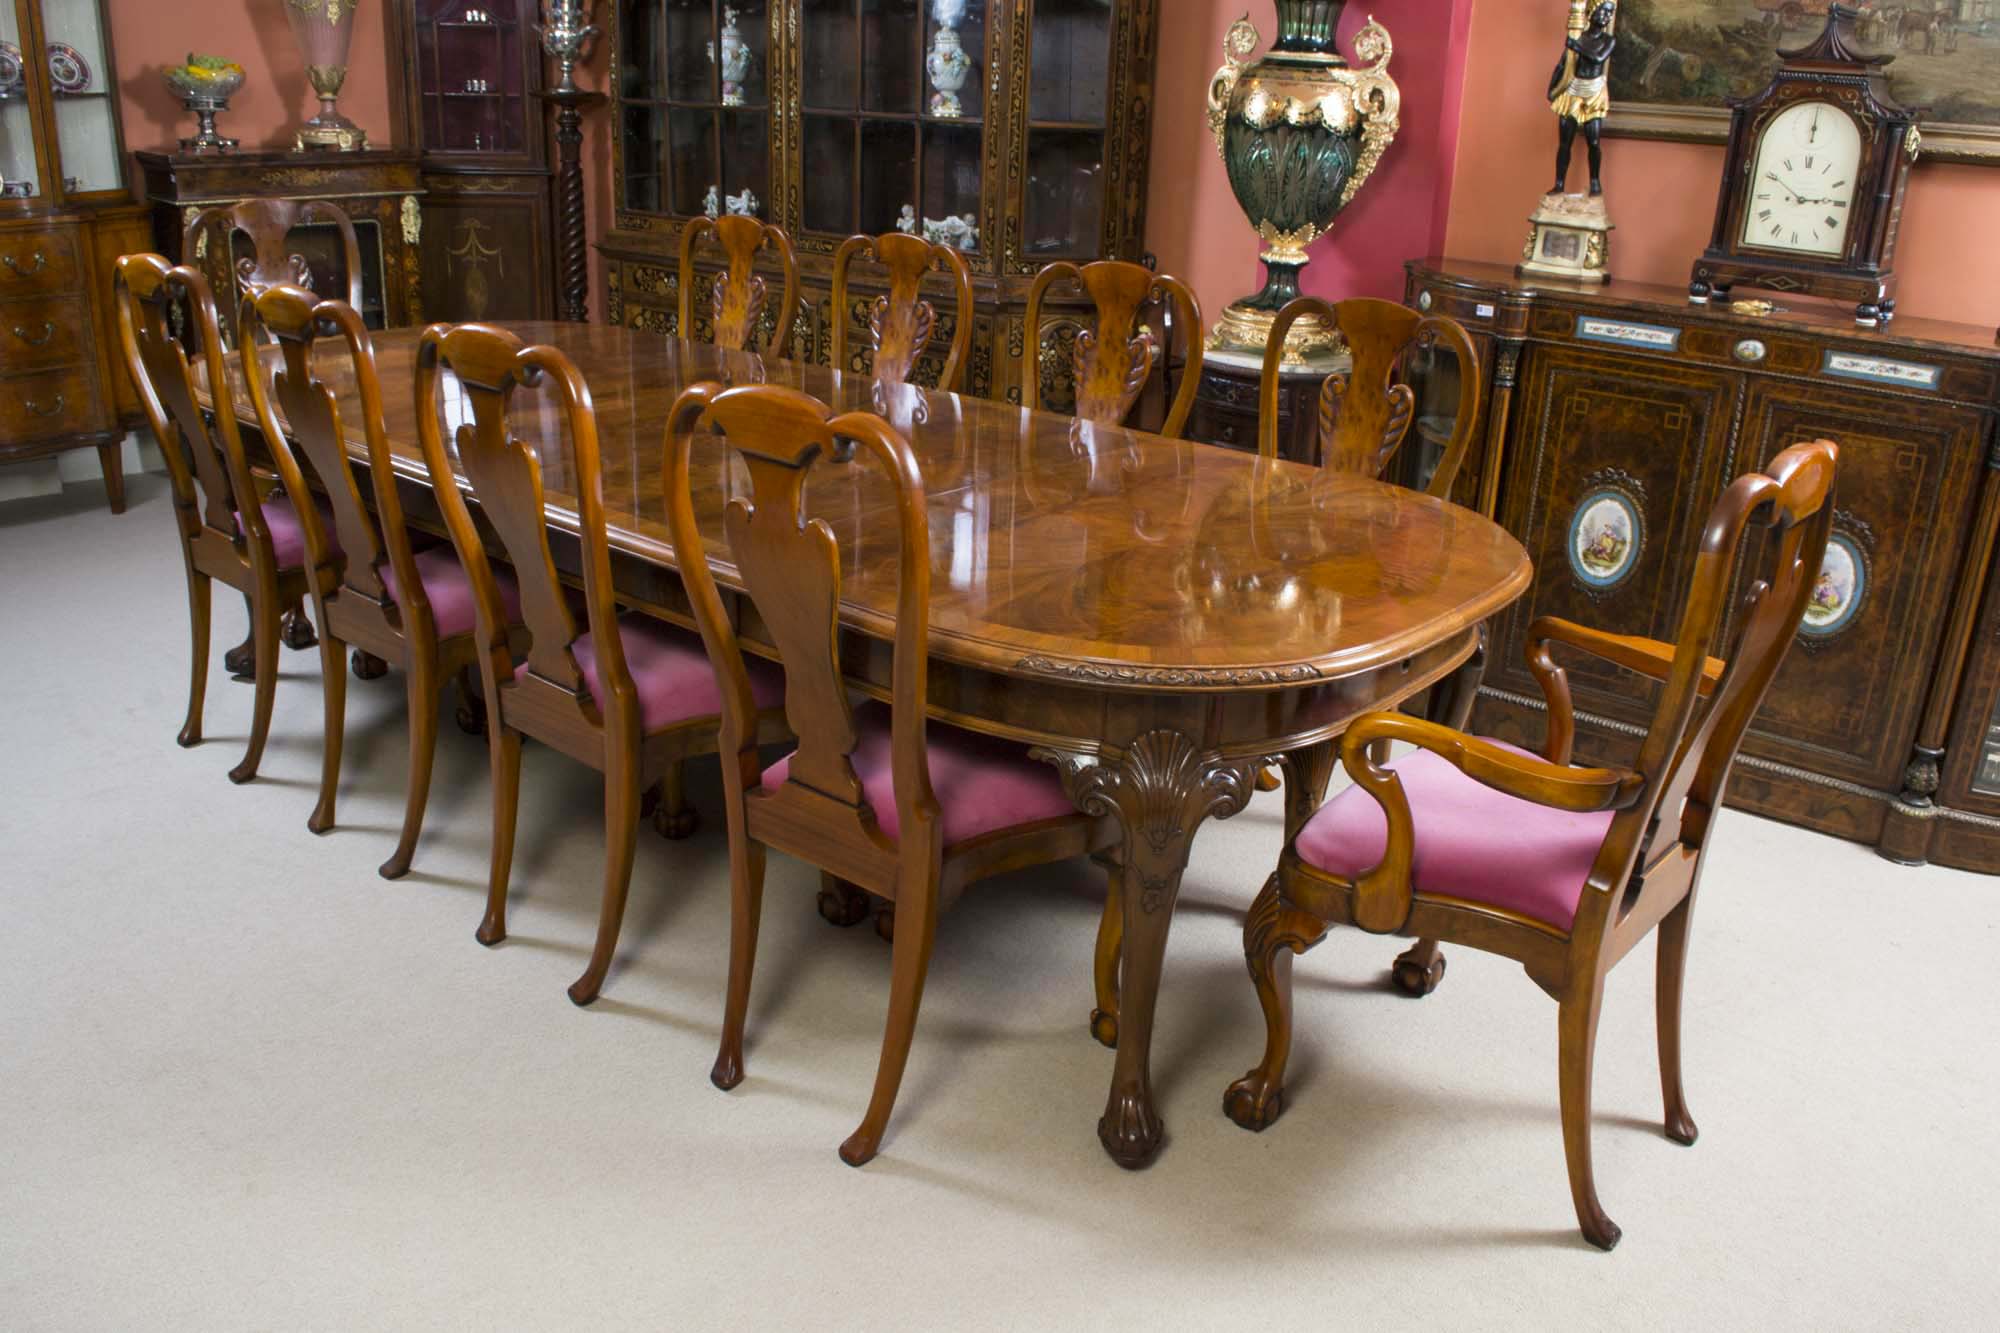 10 chair dining room table